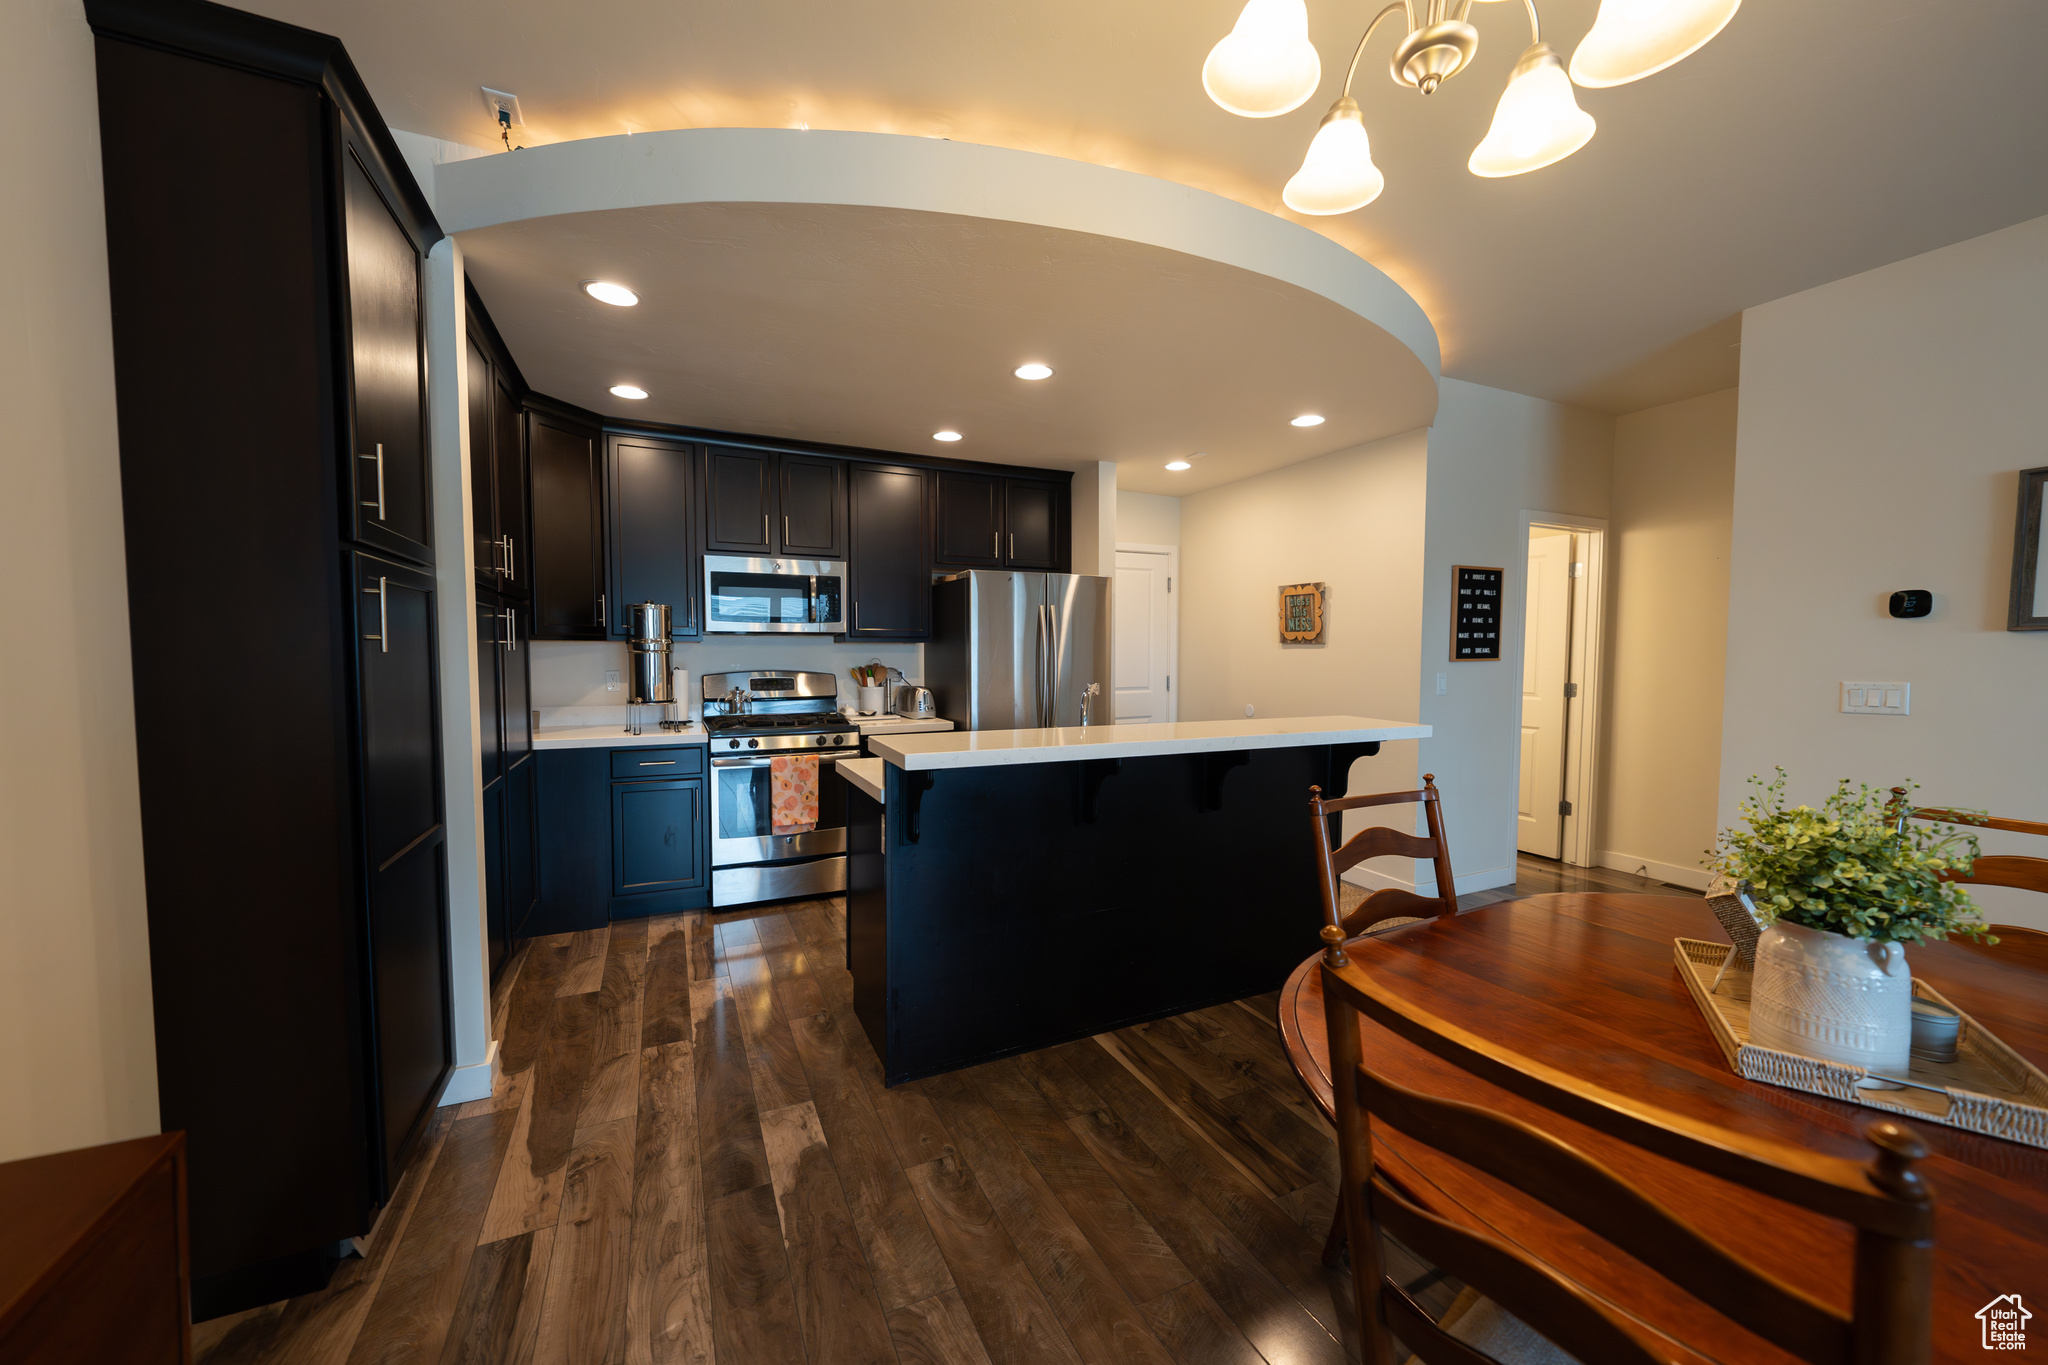 Kitchen with pendant lighting, a chandelier, a breakfast bar, appliances with stainless steel finishes, and dark hardwood / wood-style floors